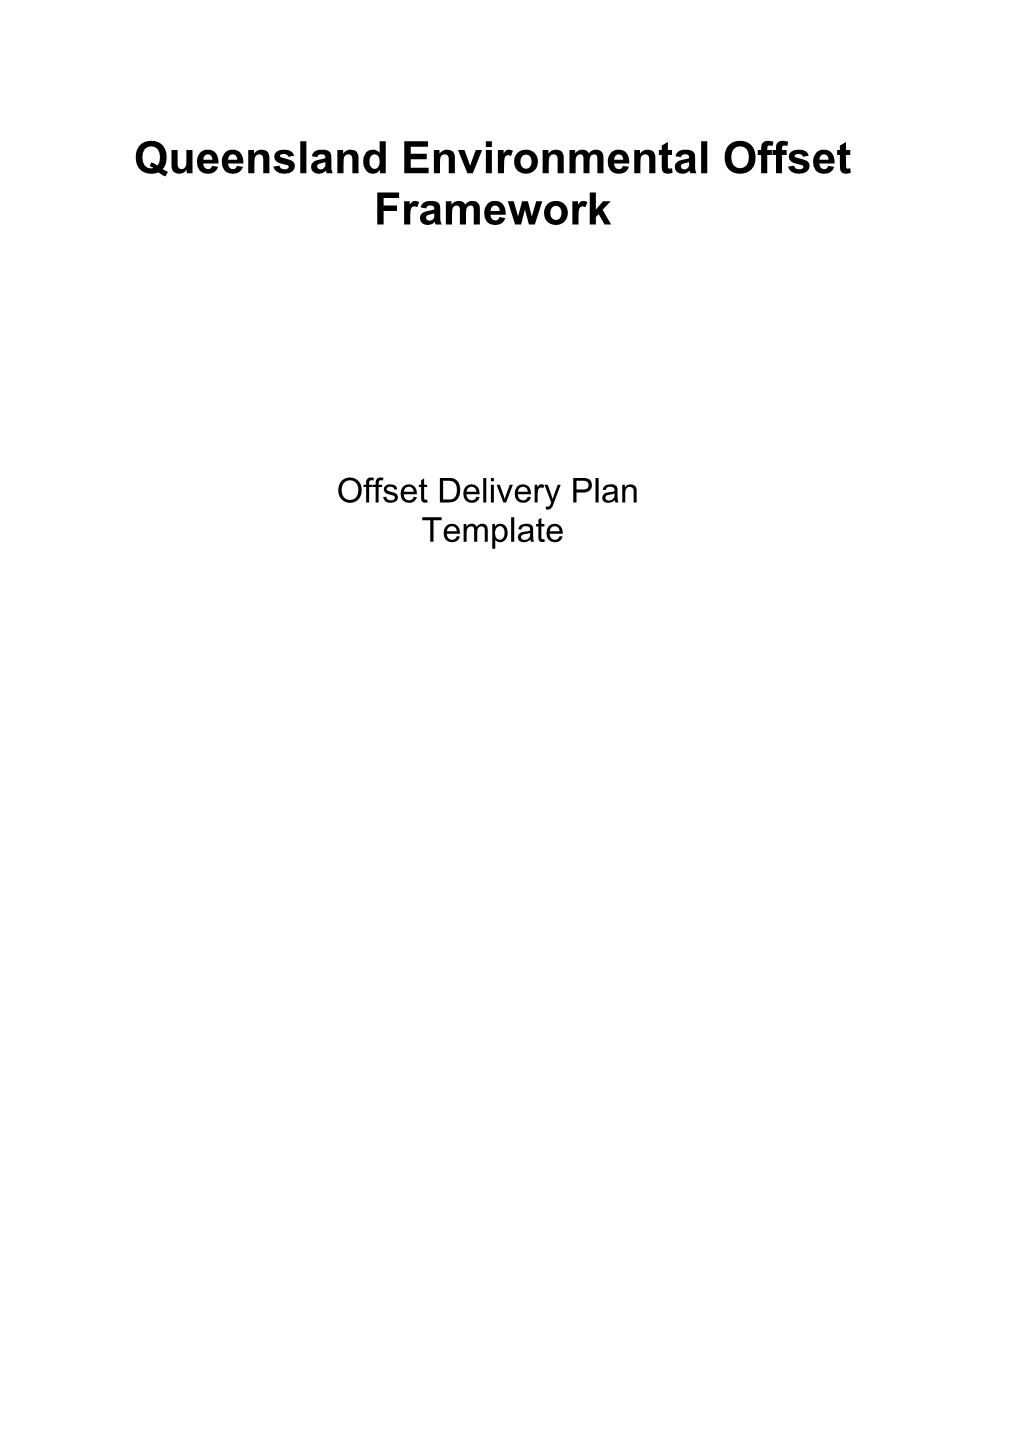 Offset Delivery Plan Template Non-Mandatory